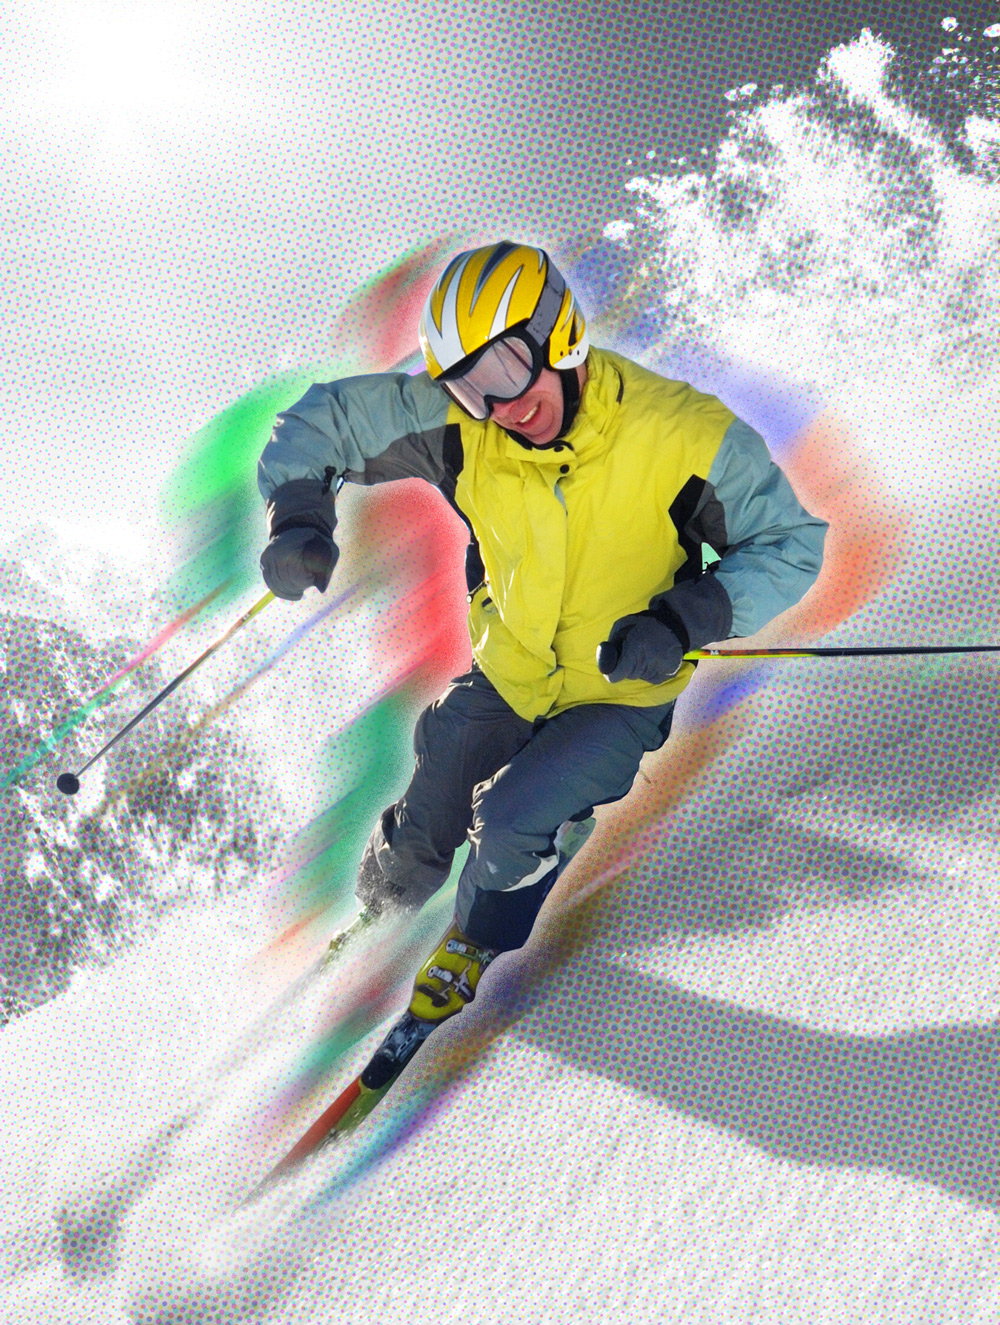 Skiing-Related Injuries: Who, What, How, When, And a Bit of Prevention 